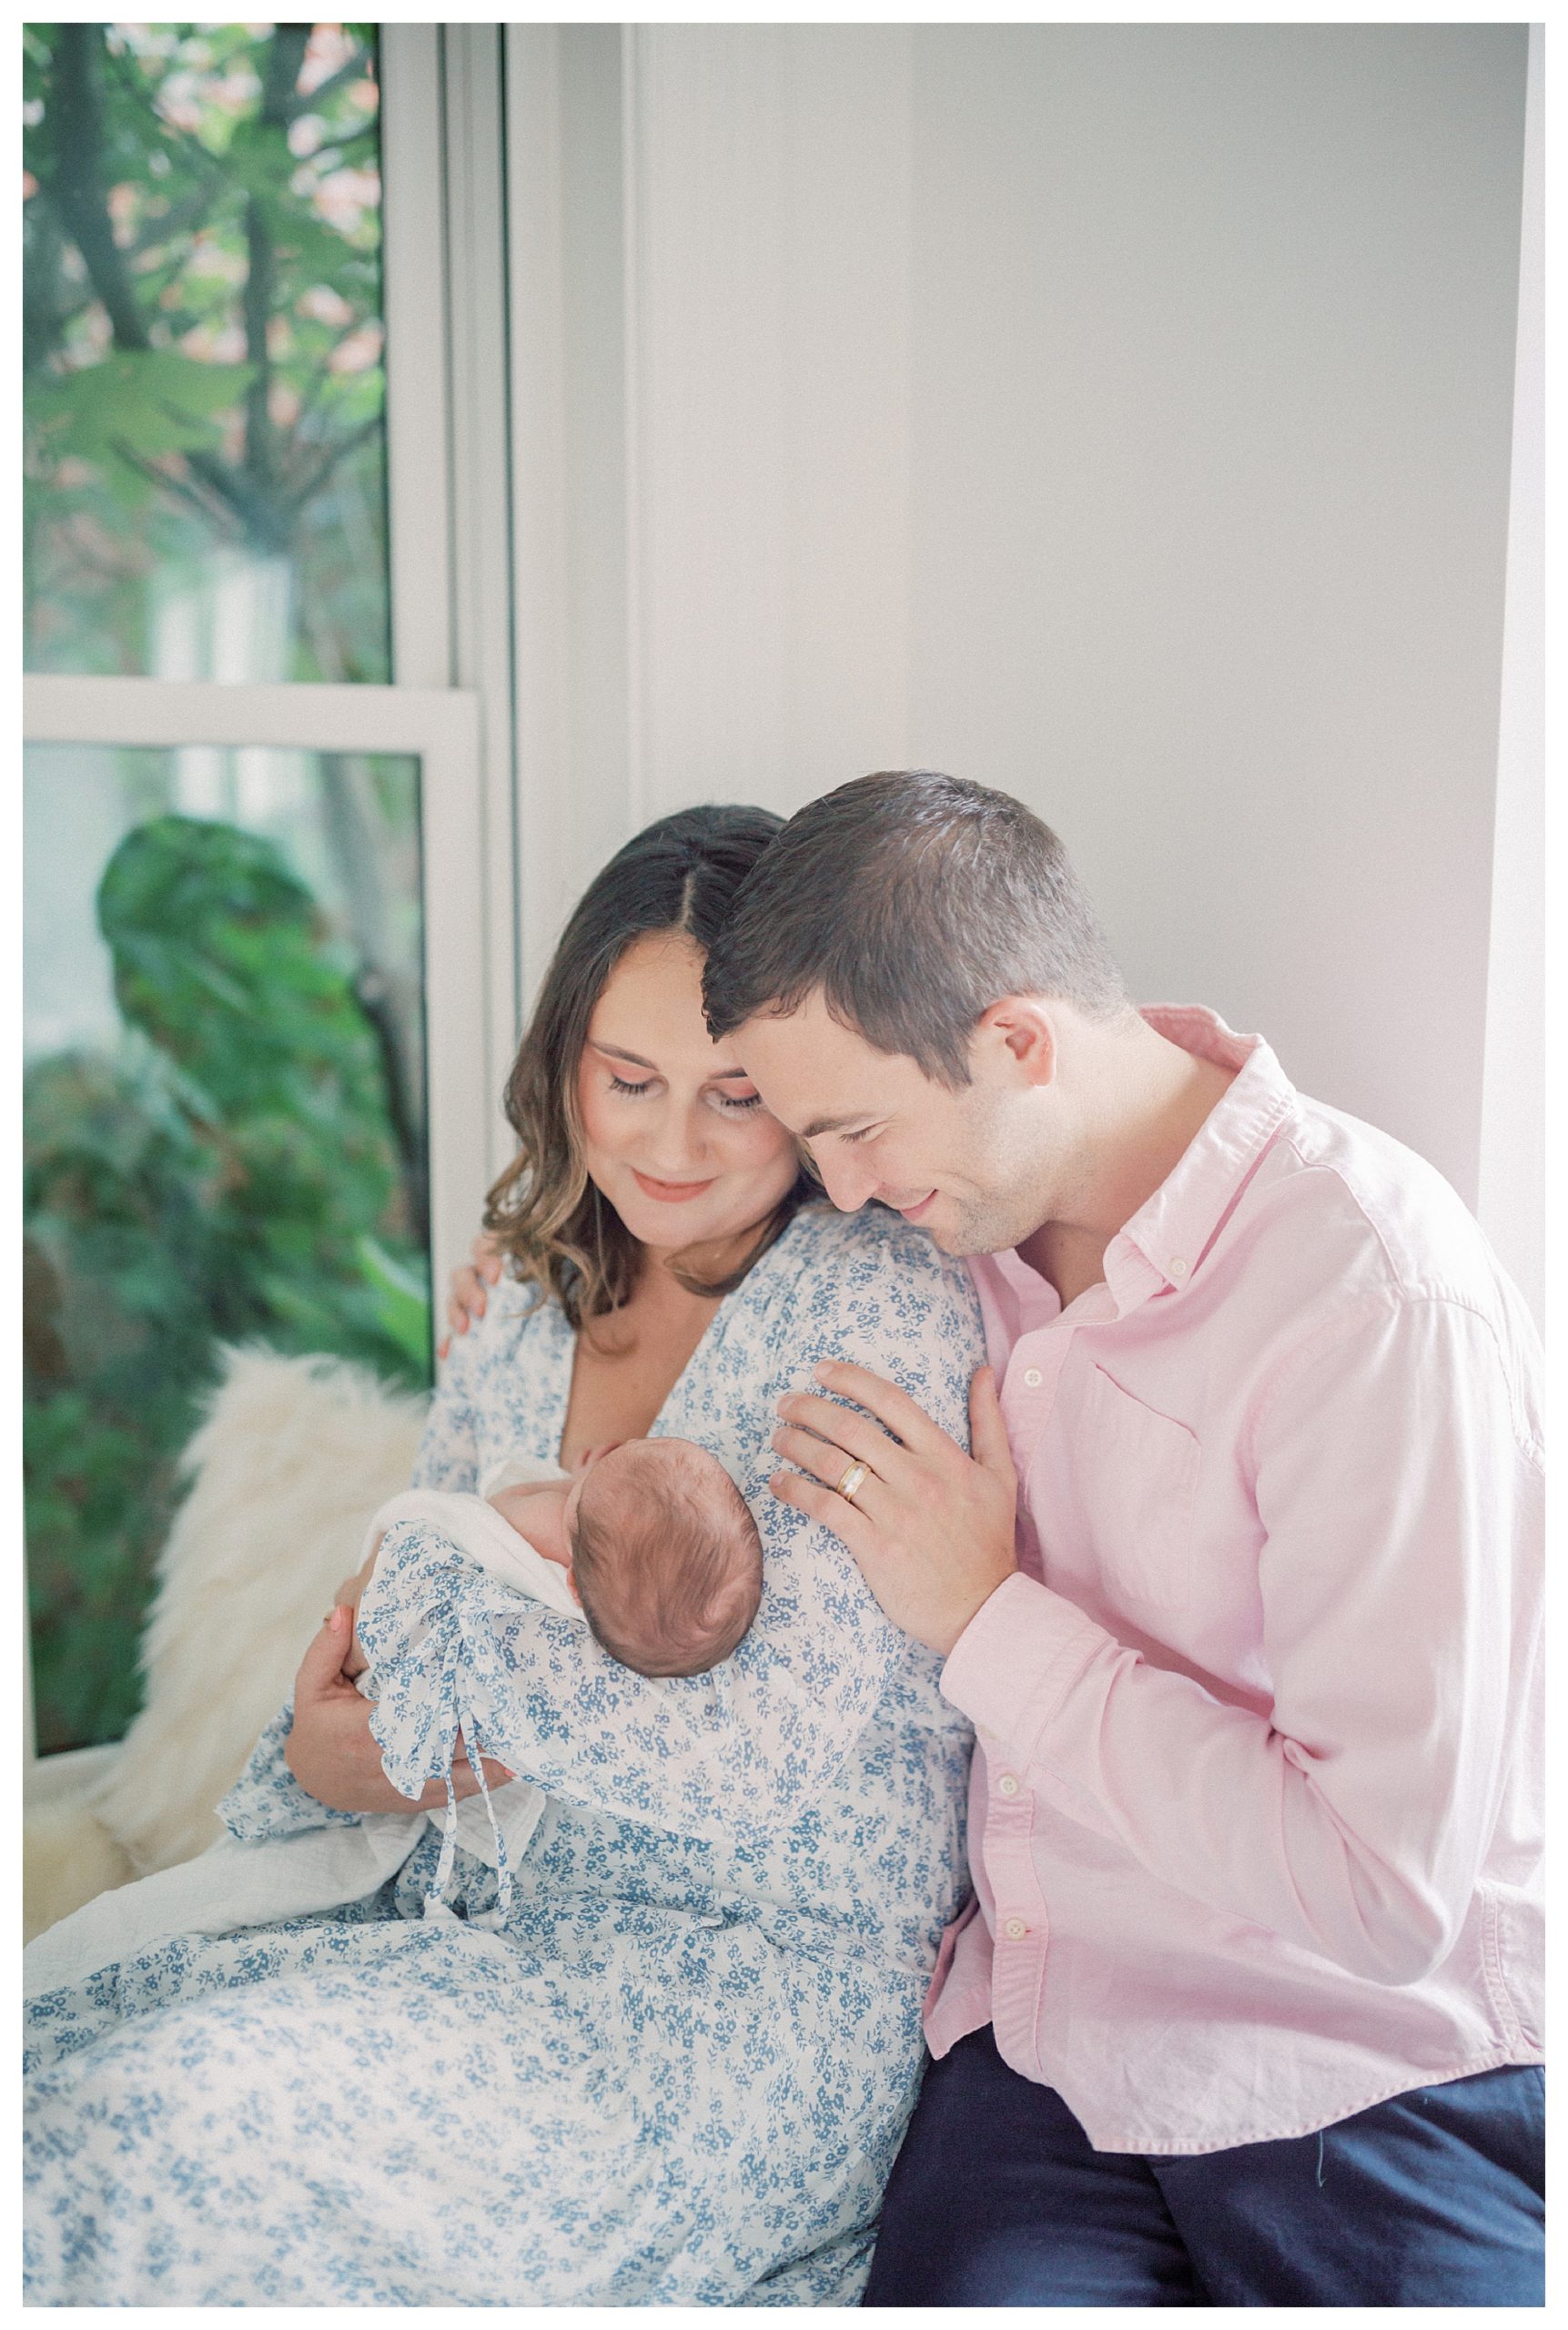 Father leans over his wife's shoulder and smiles at their newborn baby during in-home newborn session.